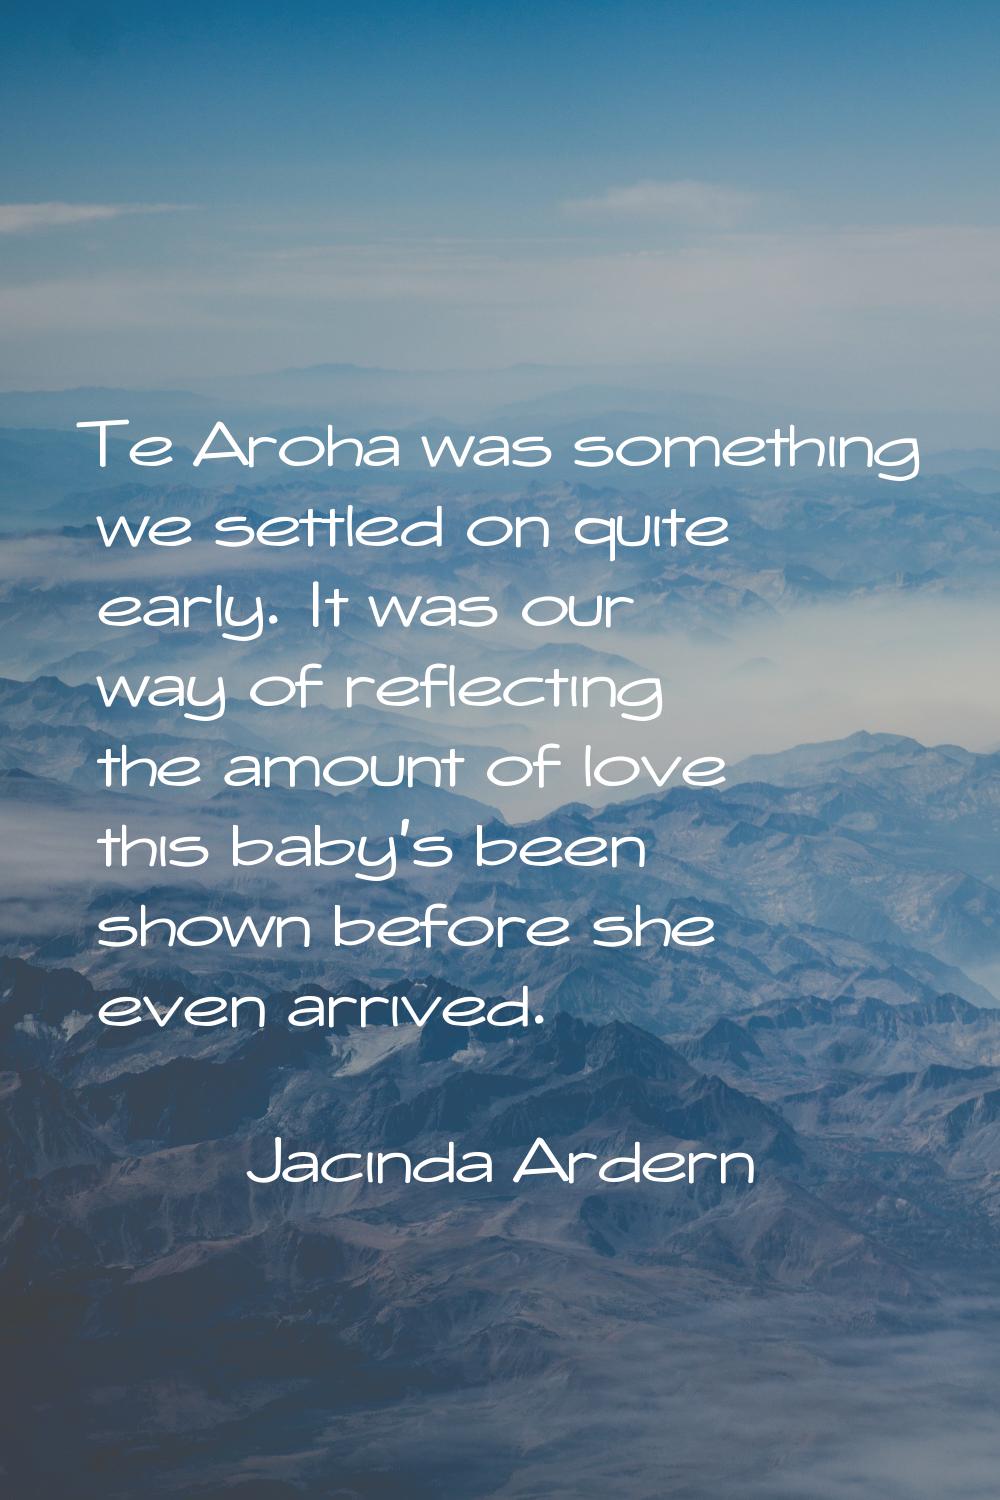 Te Aroha was something we settled on quite early. It was our way of reflecting the amount of love t